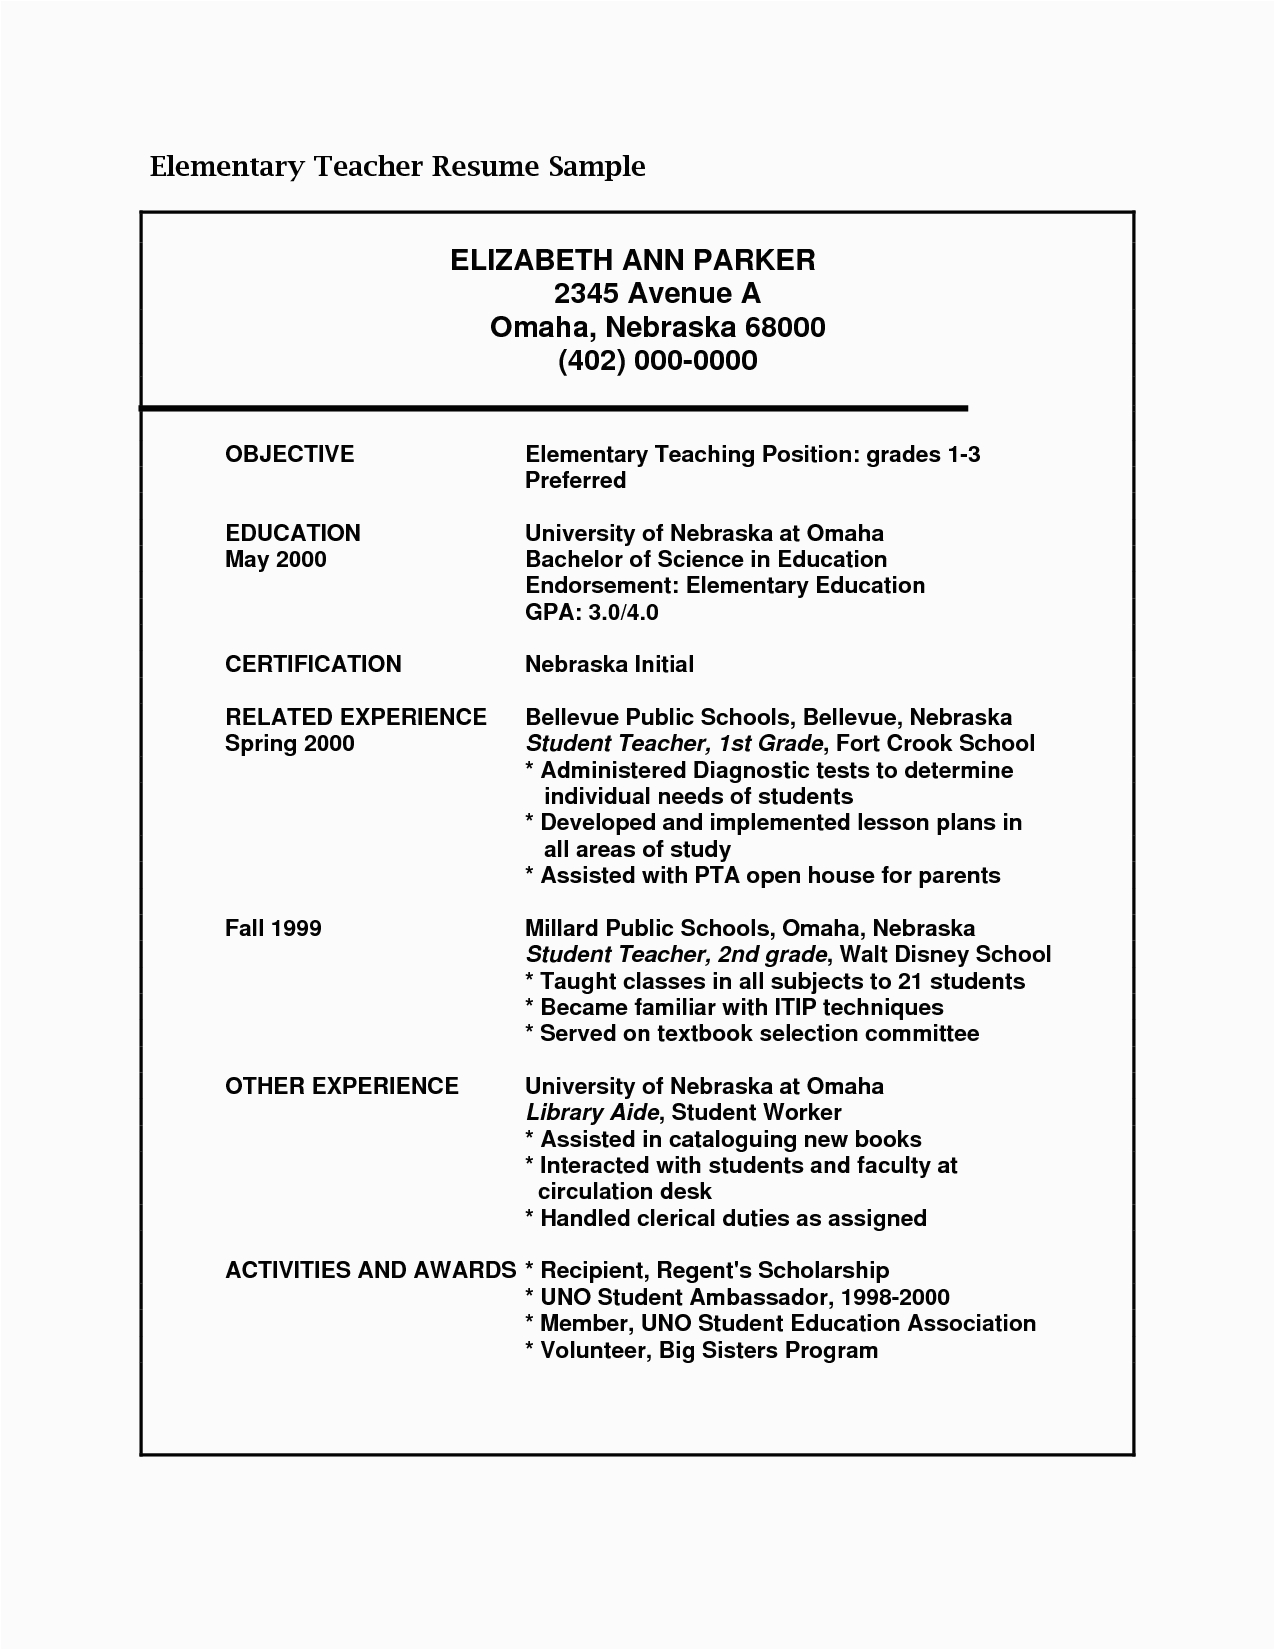 Sample Objective Of Resume for Teachers Admin Teacher Resume Examples Elementary Teacher Resume Examples High